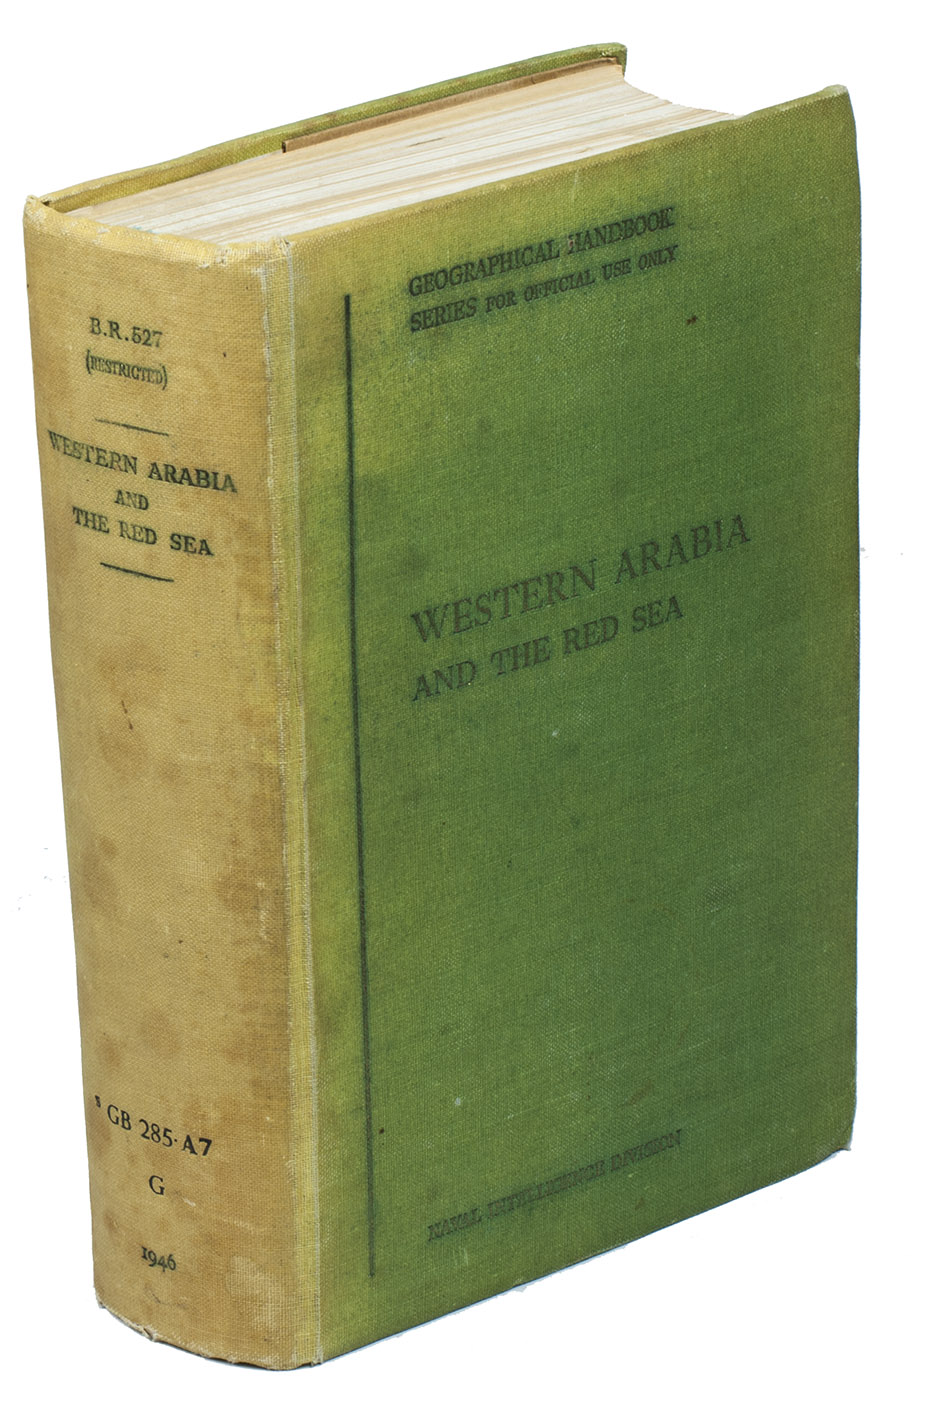 NAVAL INTELLIGENCE DIVISION, [SCOTT, Hugh, a.o.]. - Western Arabia and the Red Sea, B.R. 527 (restricted) geographical handbook series for official use only.(Colophon: Oxford, University press), Naval Intelligence division, 1946. 8vo. With 357 reproductions of photographs on 90 plates, numerous (folding) maps and illustrations in text and 1 separate folding map. Original publisher's green cloth.